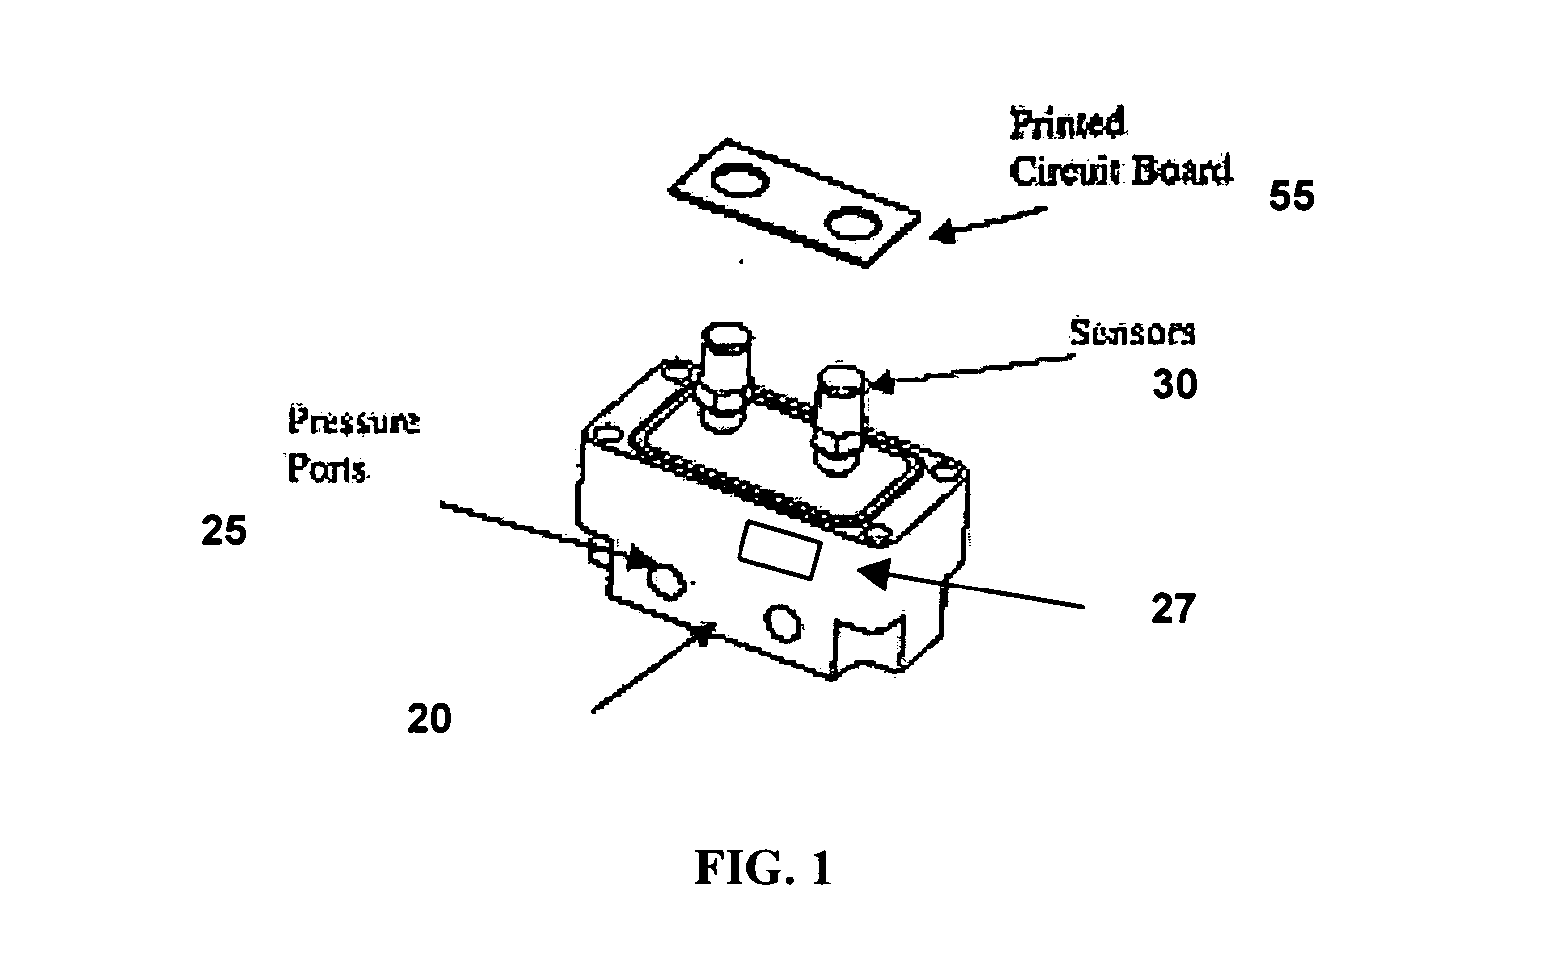 Field replacable sensor module and methods of use thereof